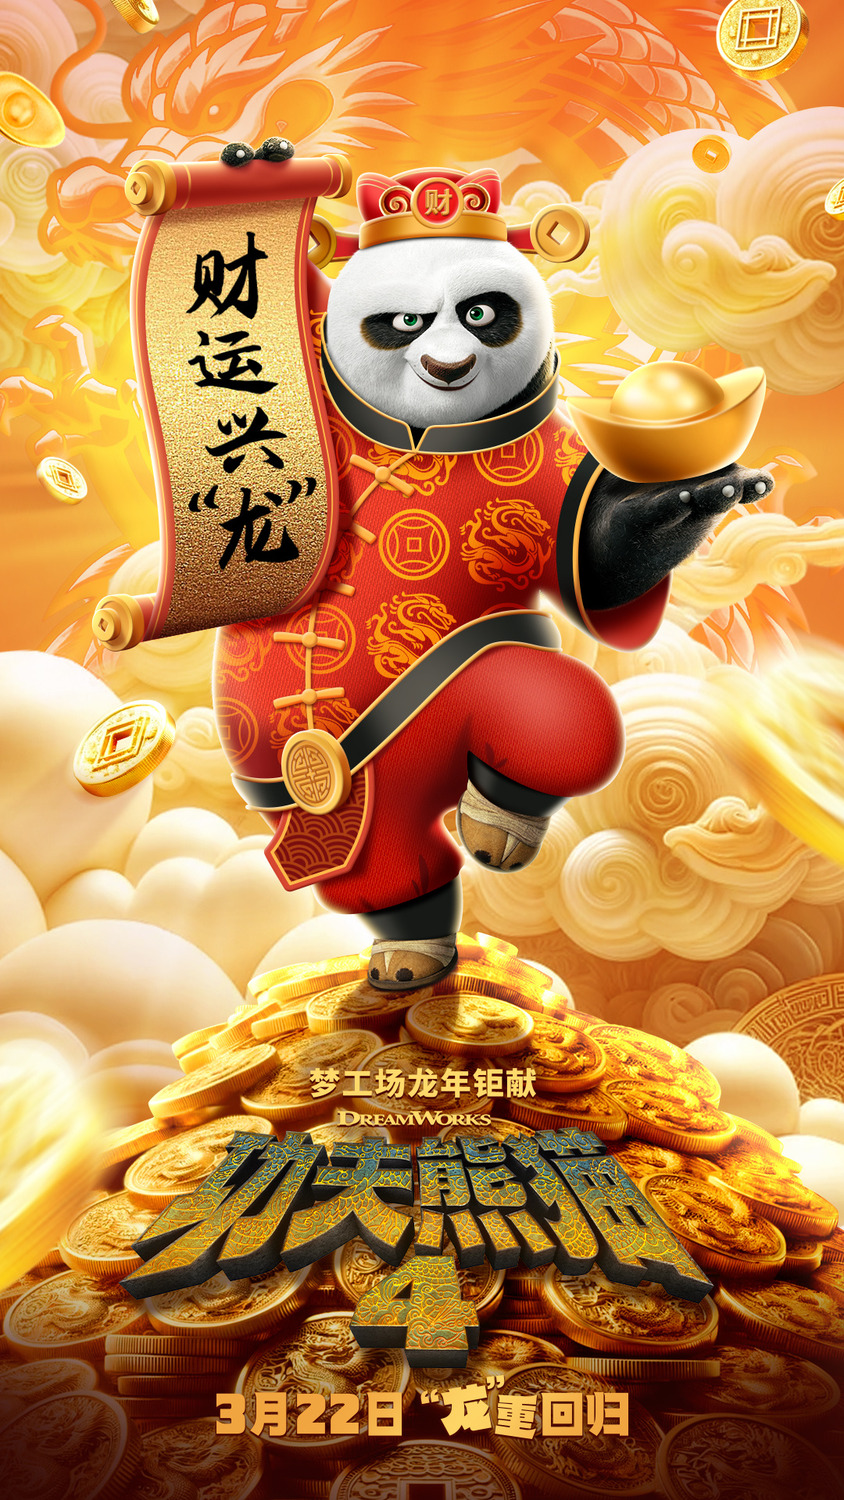 Extra Large Movie Poster Image for Kung Fu Panda 4 (#12 of 20)